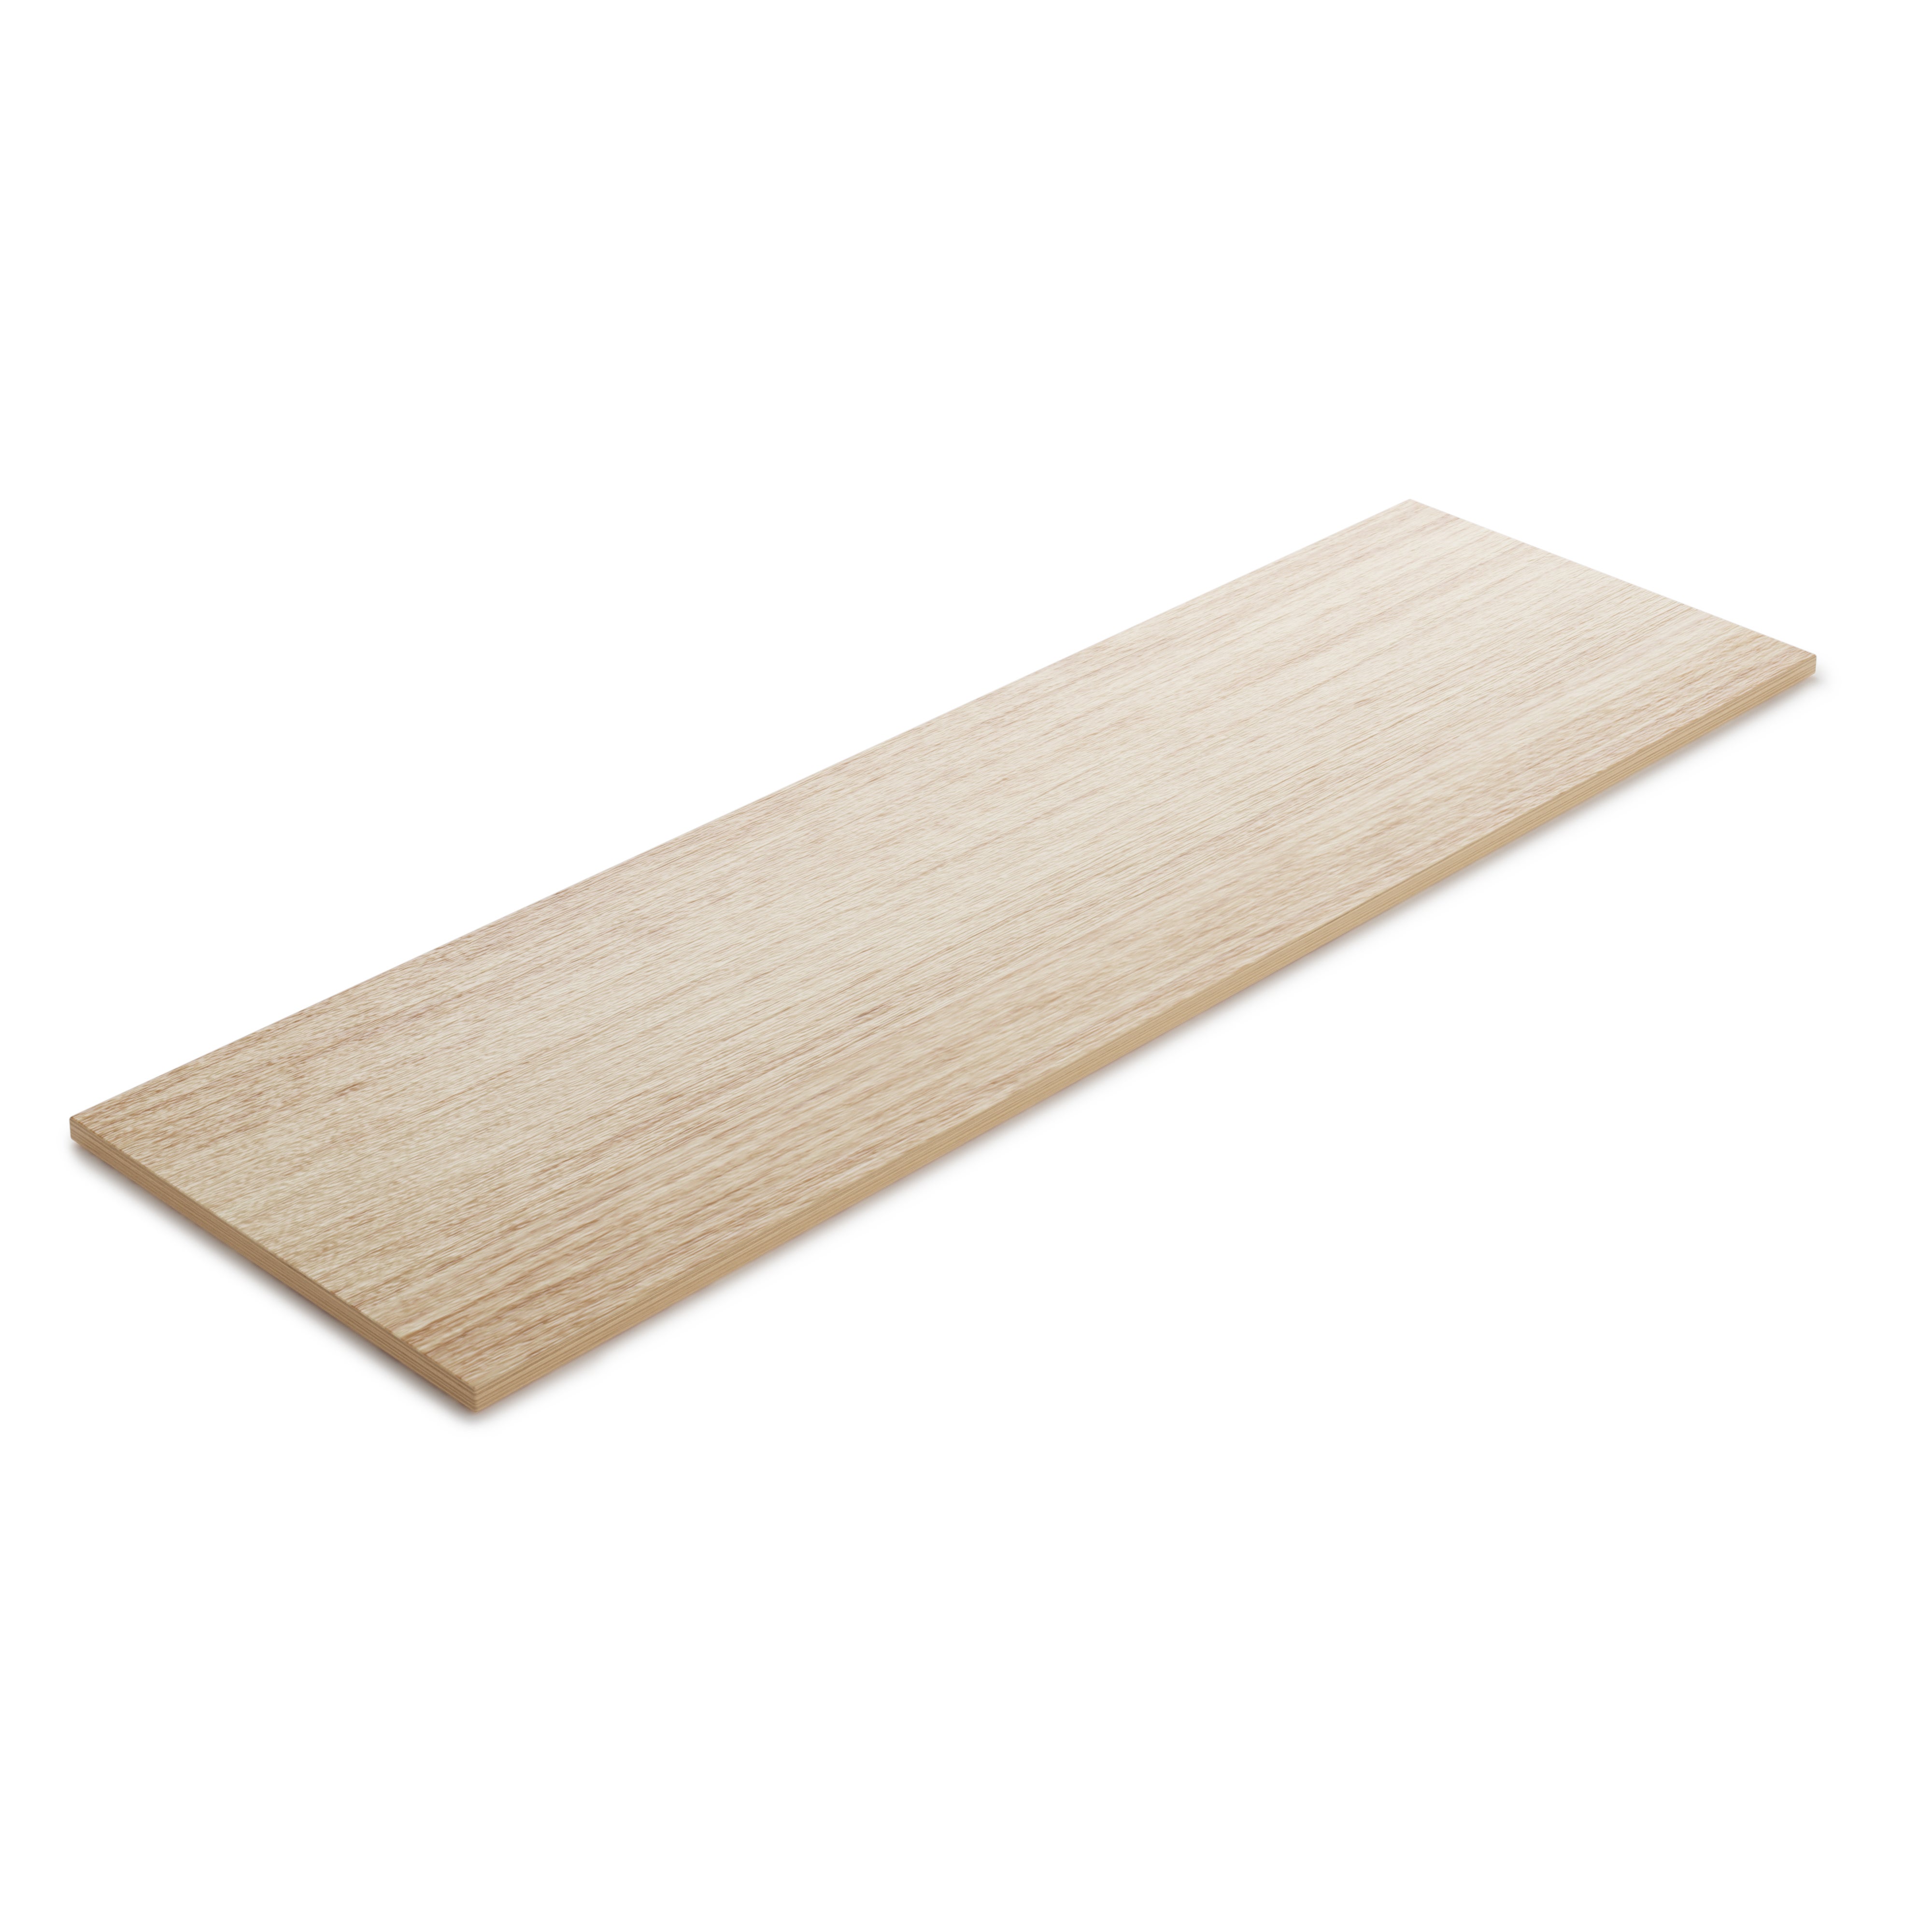 Click to view product details and reviews for Modular Light Oak 120cm Wooden Shelf Panel Component Light Oak Brown.